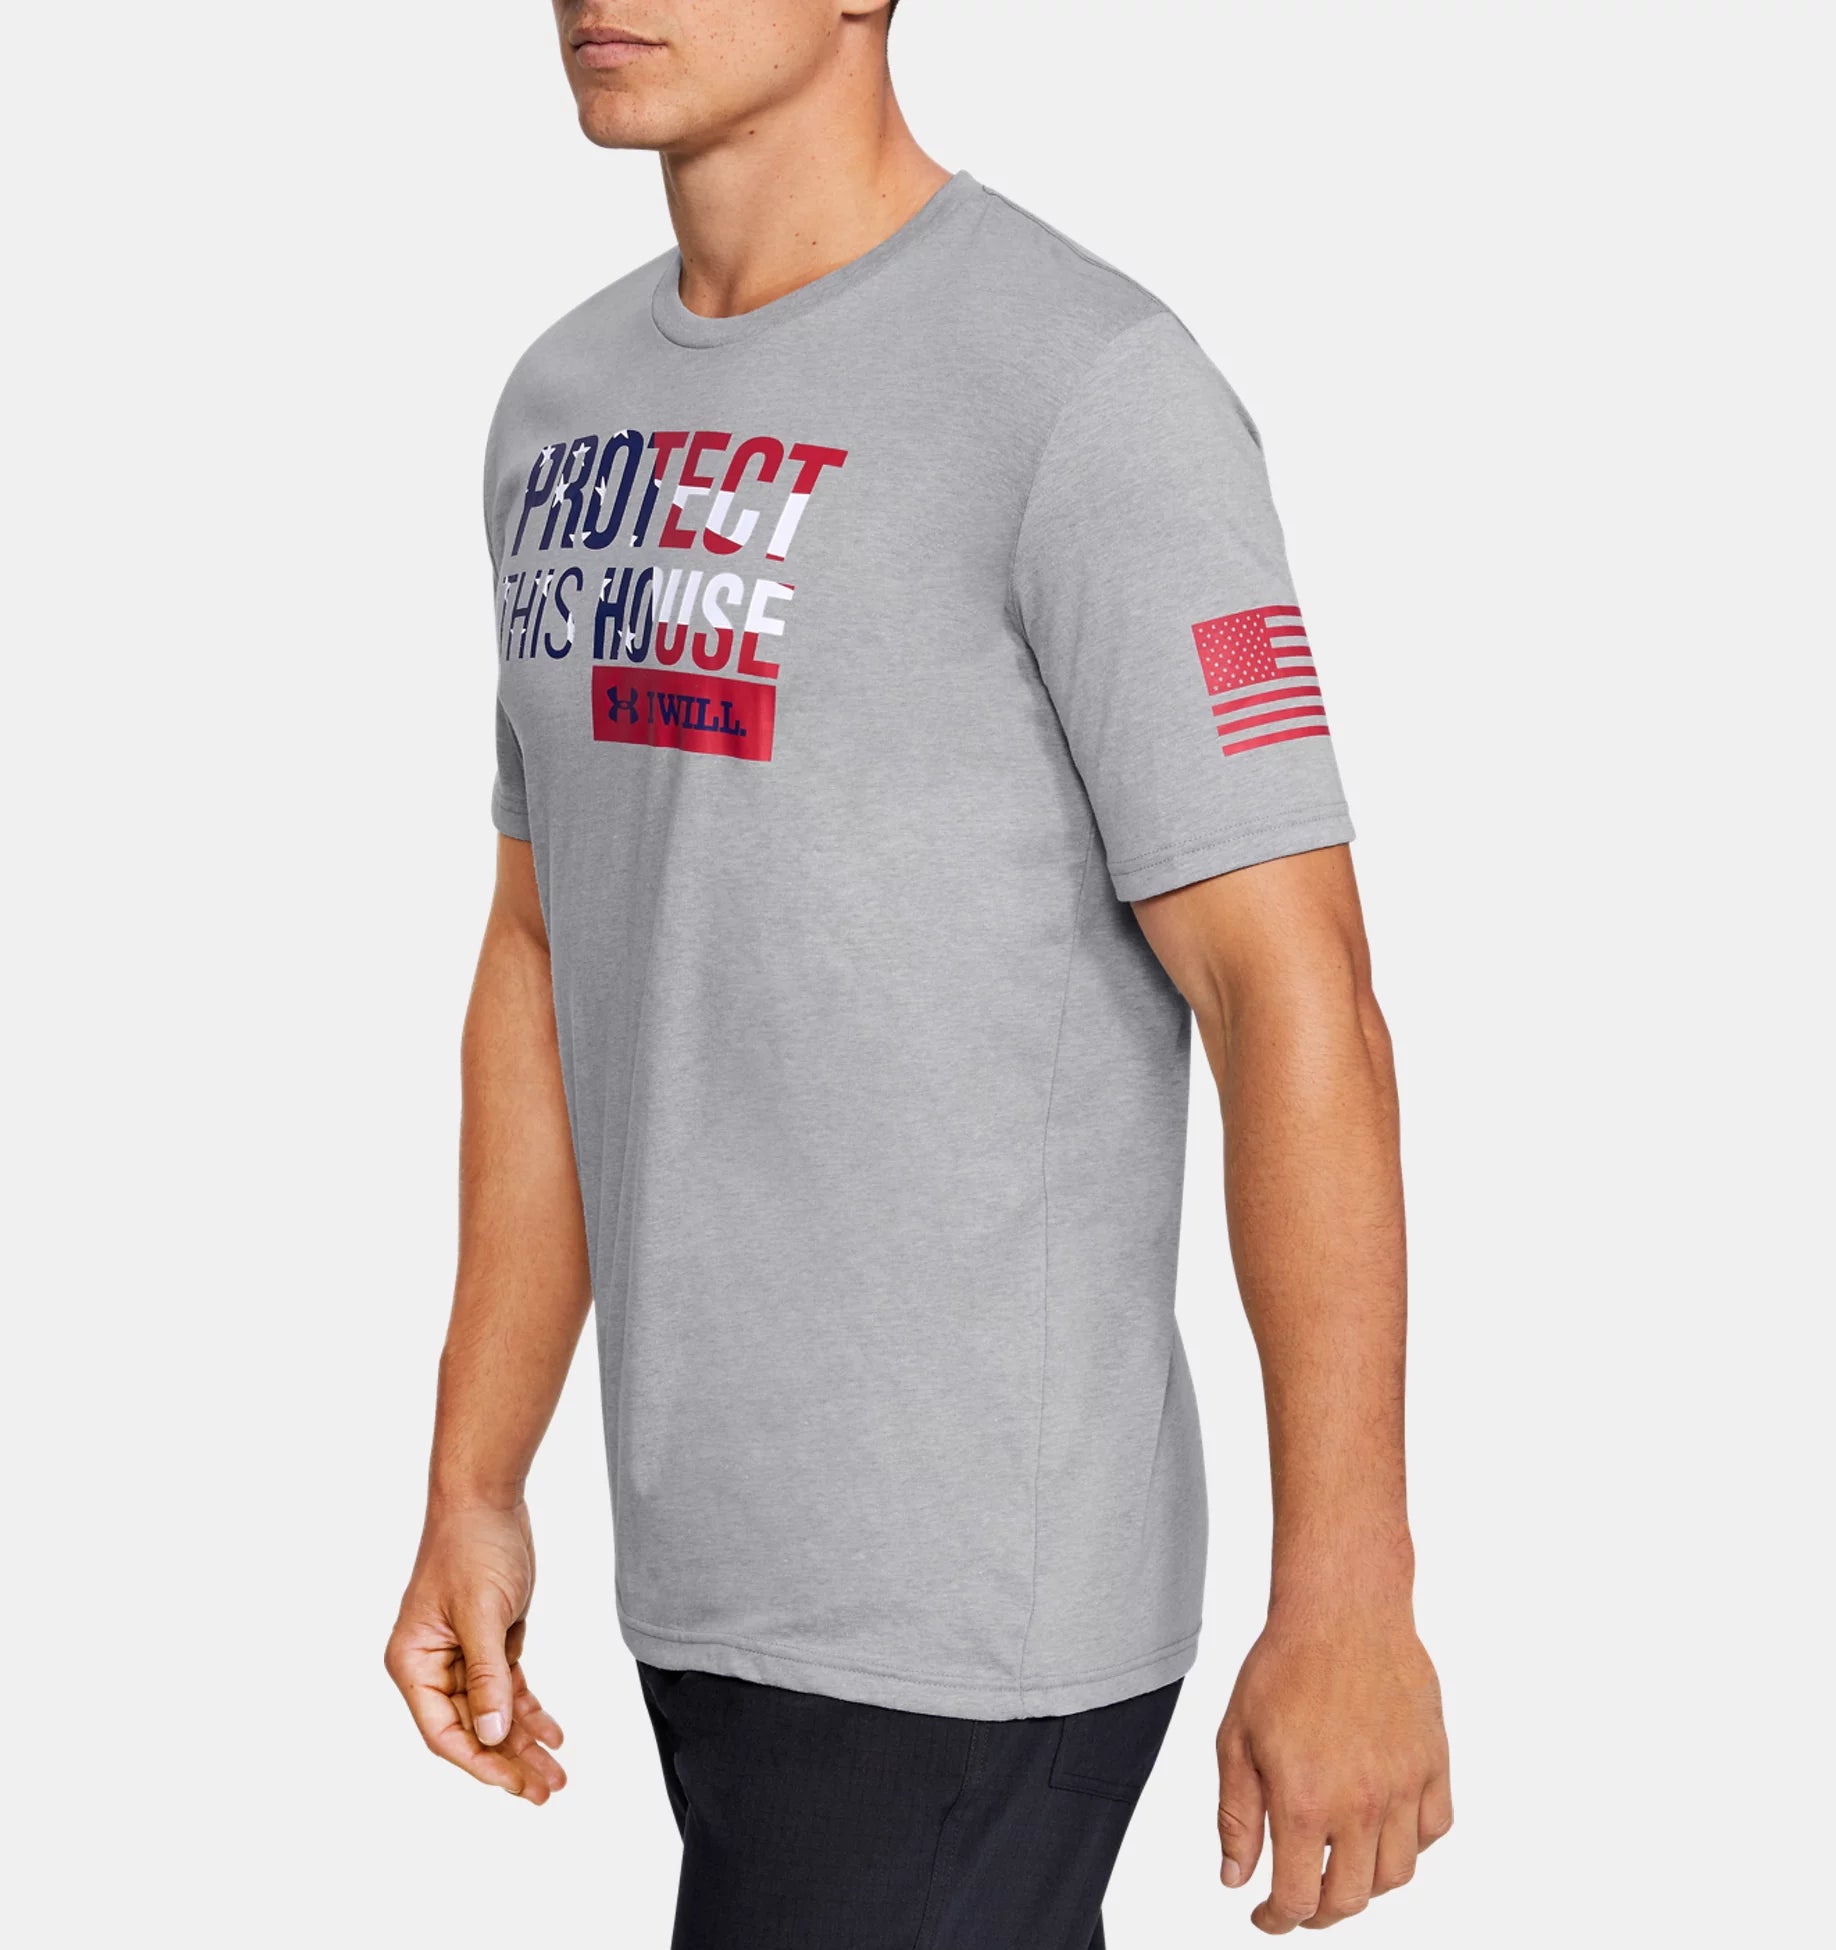 UA Freedom Protect This House Tee T-Shirt Under Armour 